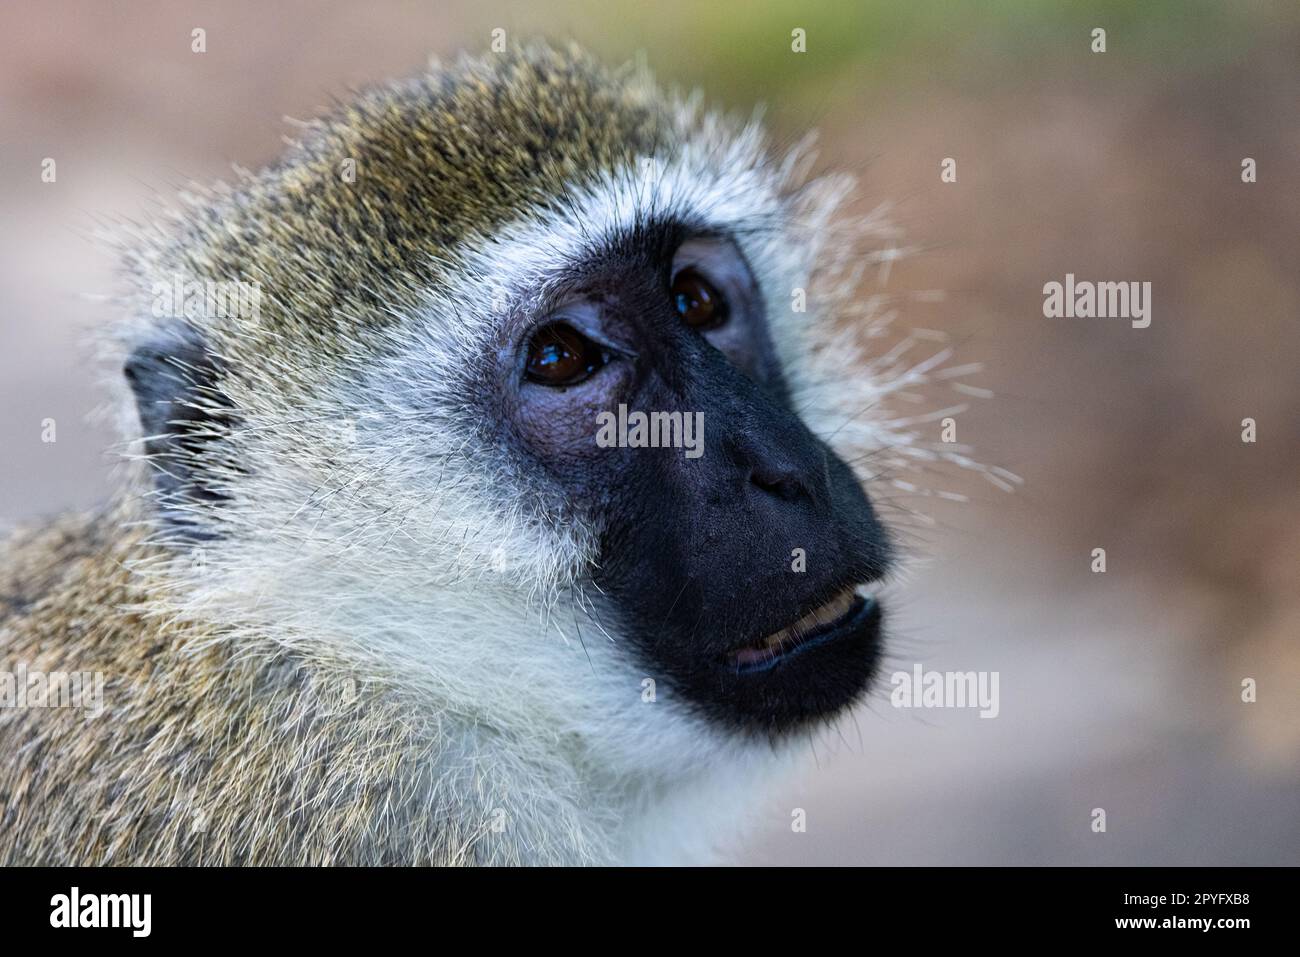 A close-up photo of a Vervet Monkey's face, capturing its expressive features and stunning fur patterns Stock Photo